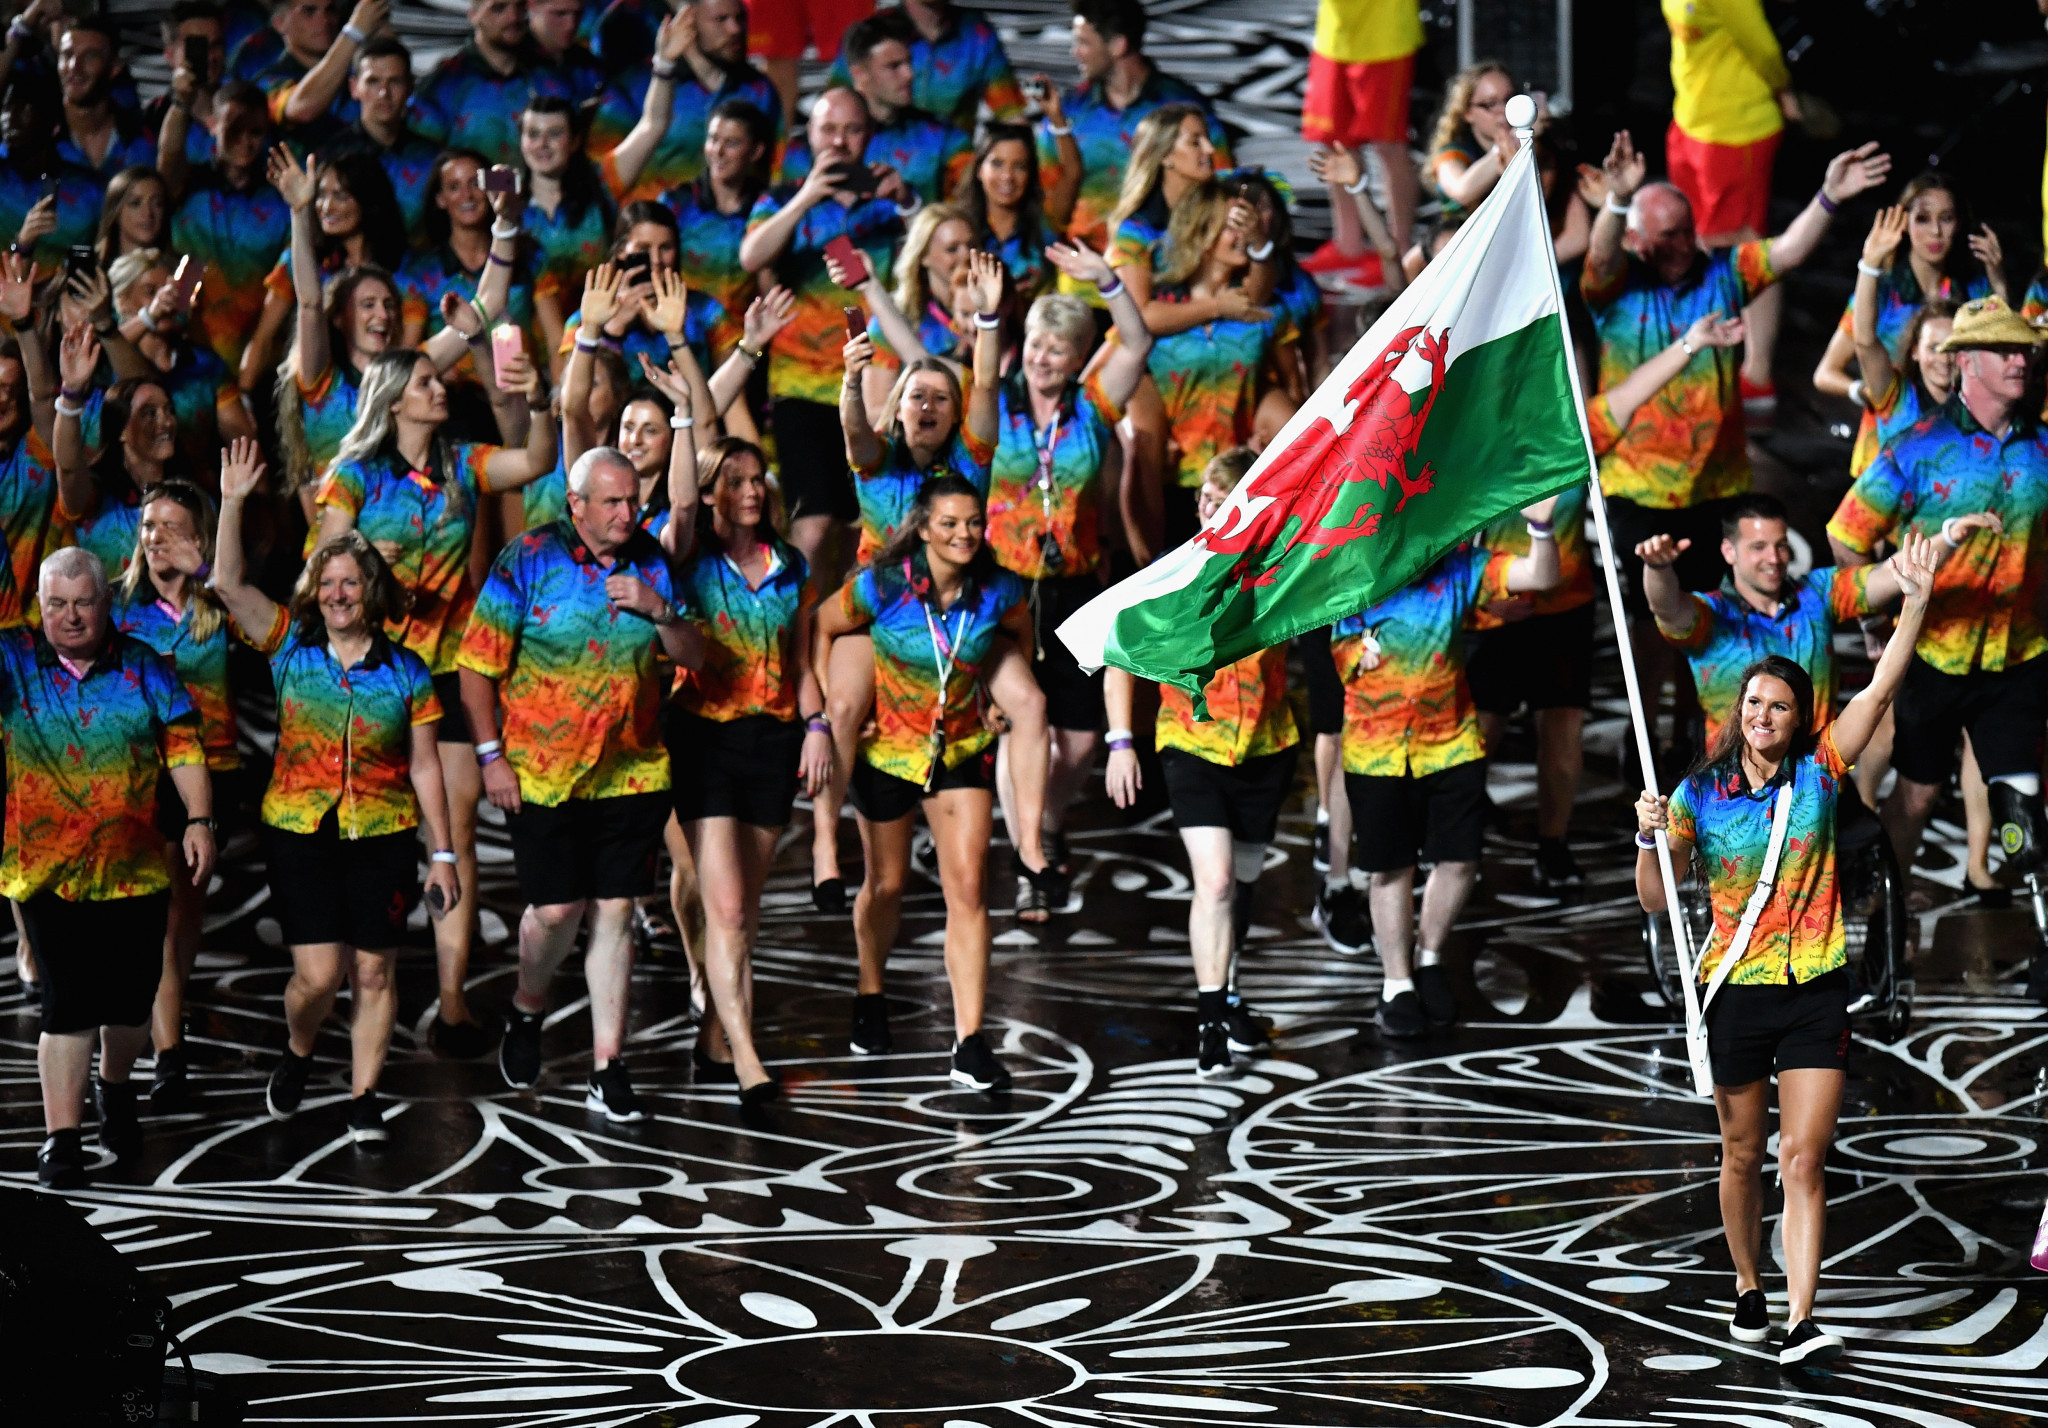 Wales produced its best-ever performance at the Gold Coast 2018 Commonwealth Games ©Getty Images